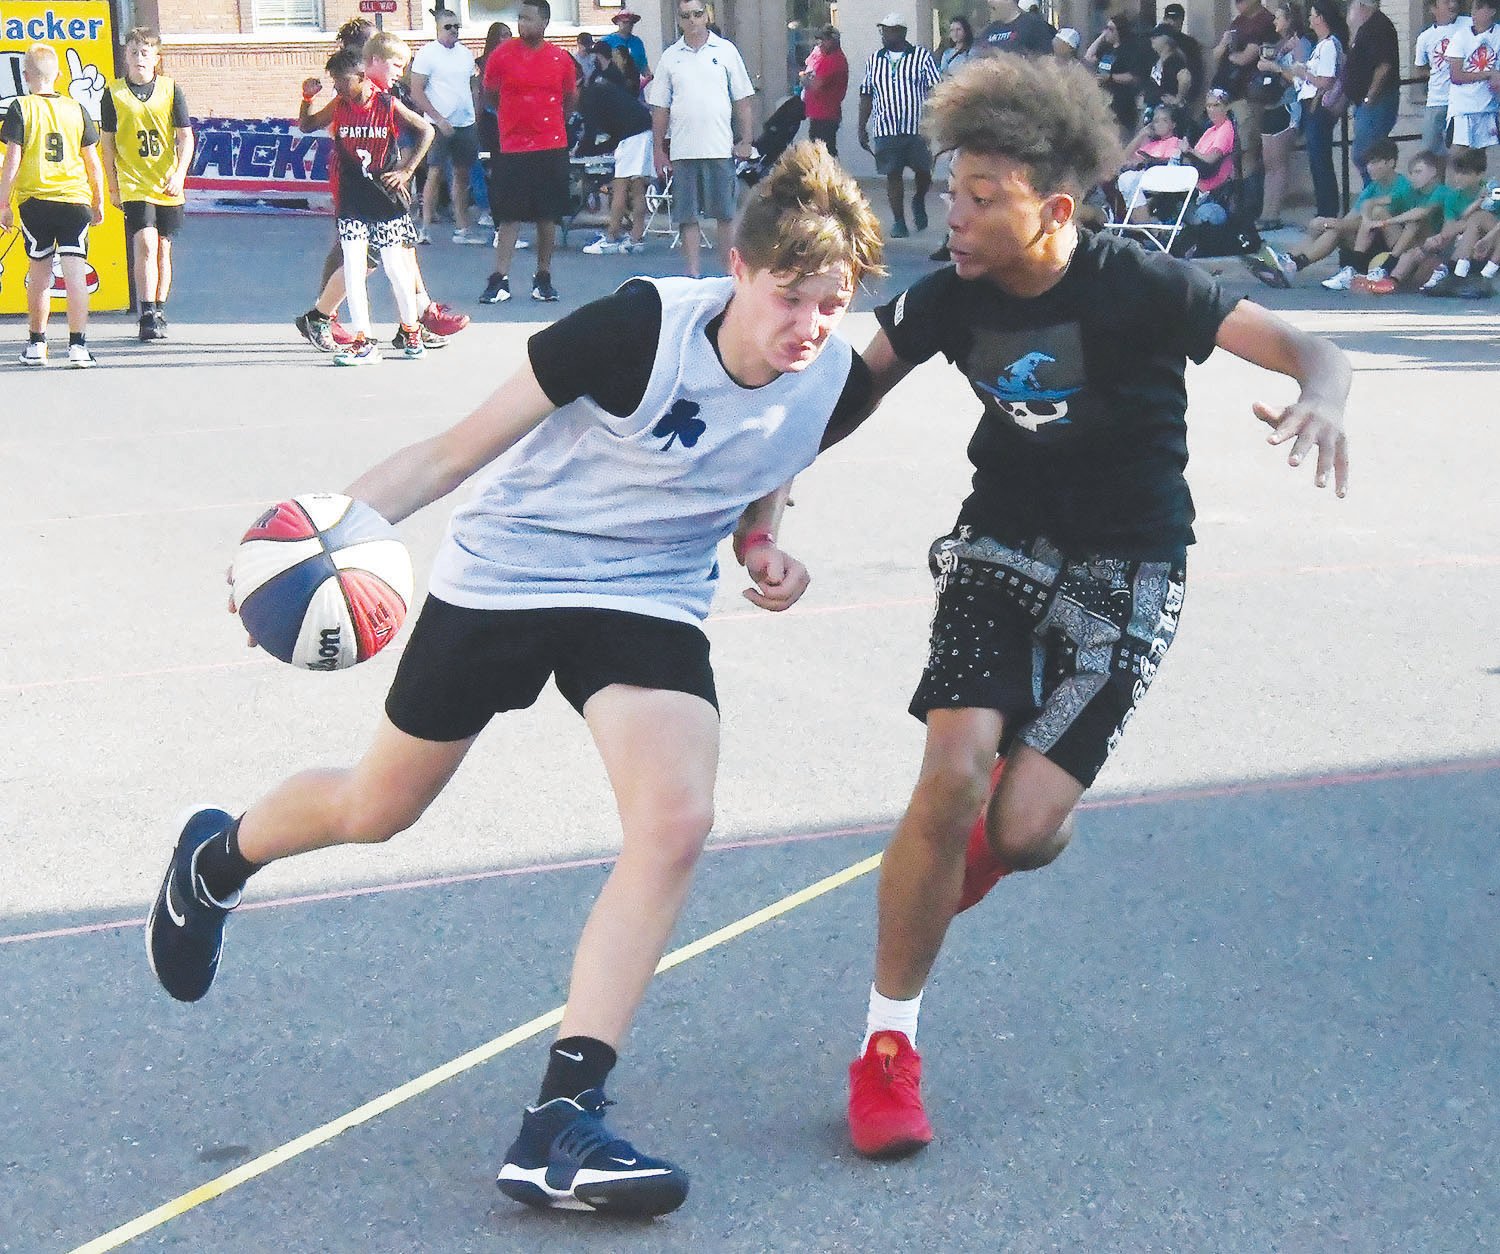 Games were competitive throughout the Second Annual Gus Macker Tournament. Moberly Area Chamber of Commerce executive director Megan Schmitt said there will be another Macker Tournament next year since the city is contracted for at least one more.